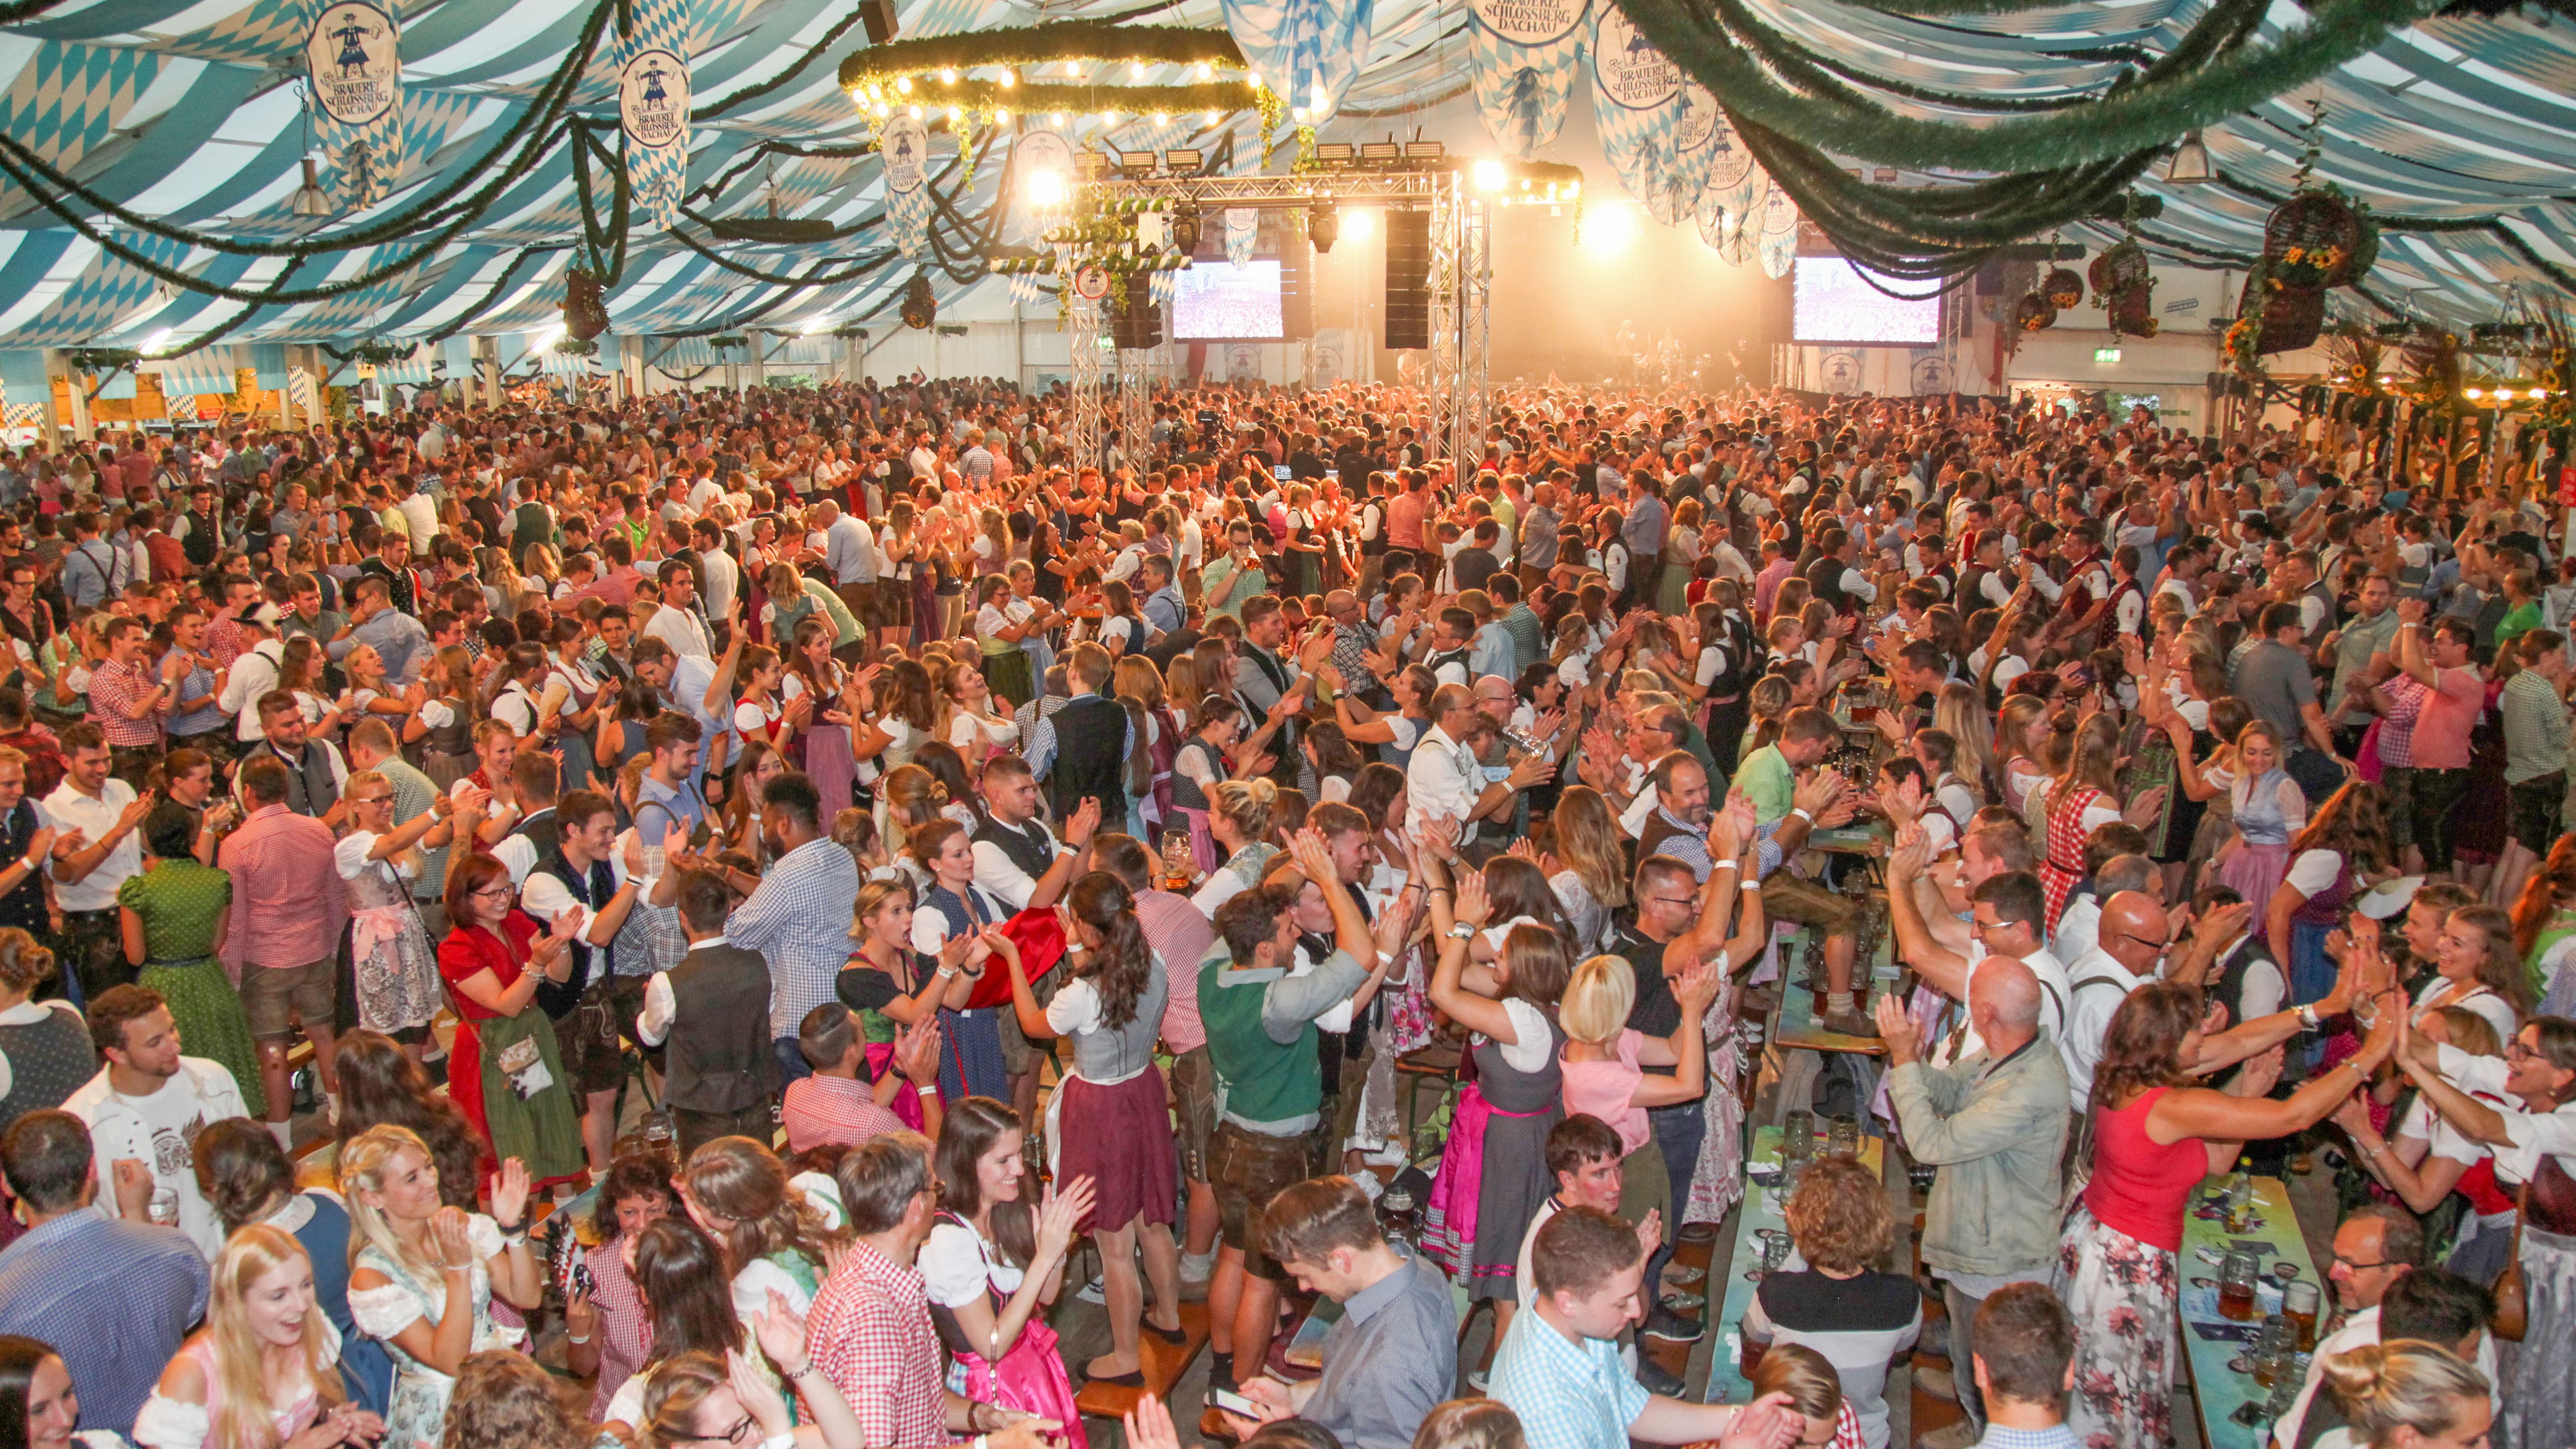 Photo of guests inside the big beer tent at Dachau country fair (Dachauer Volksfest) in August. Photo: City of Dachau